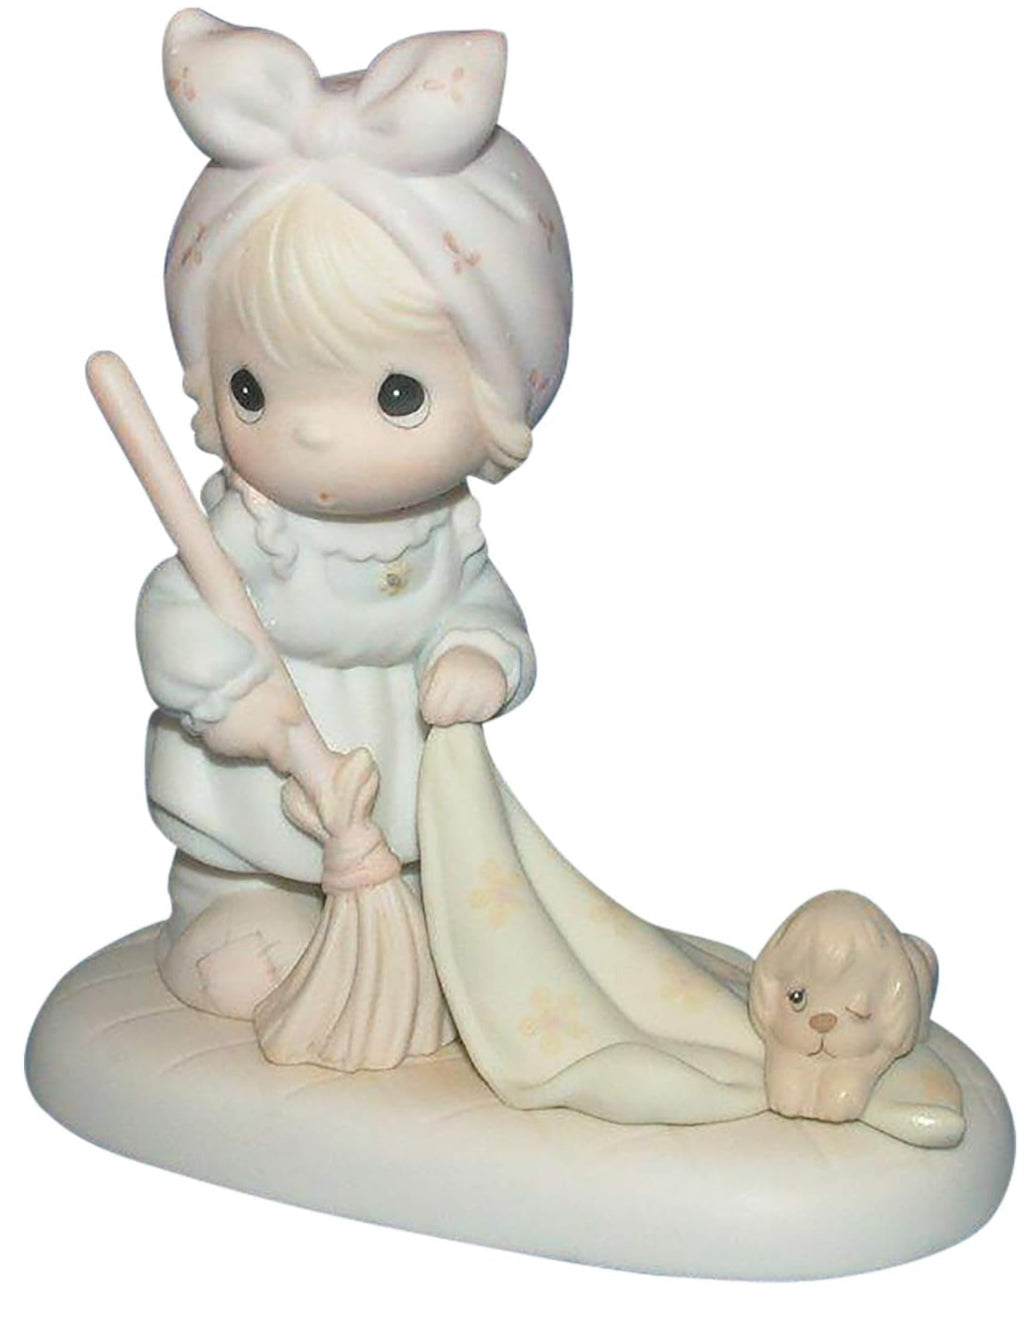 Sweep All Your Worries Away - Precious Moments Figurine 521779